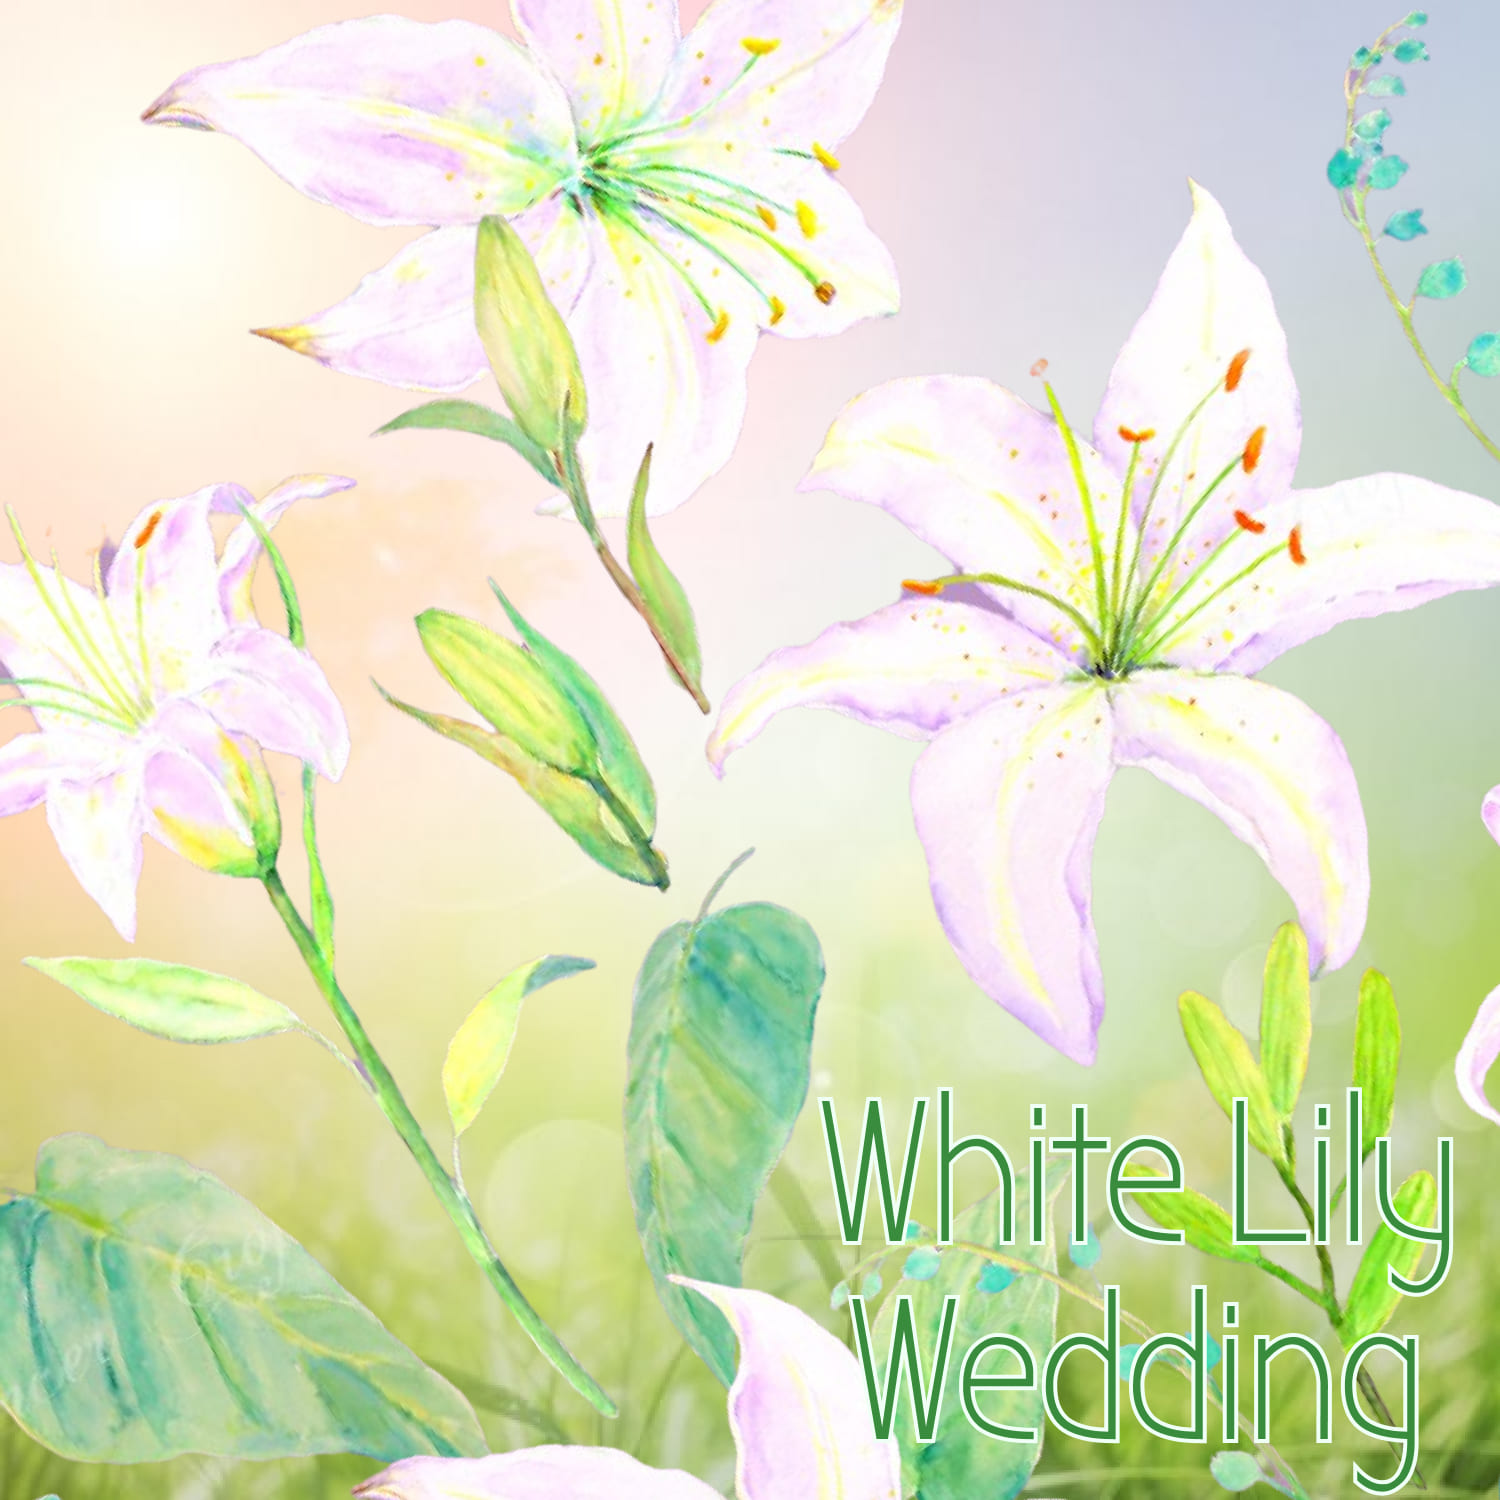 12 Hand painted watercolor white lily.